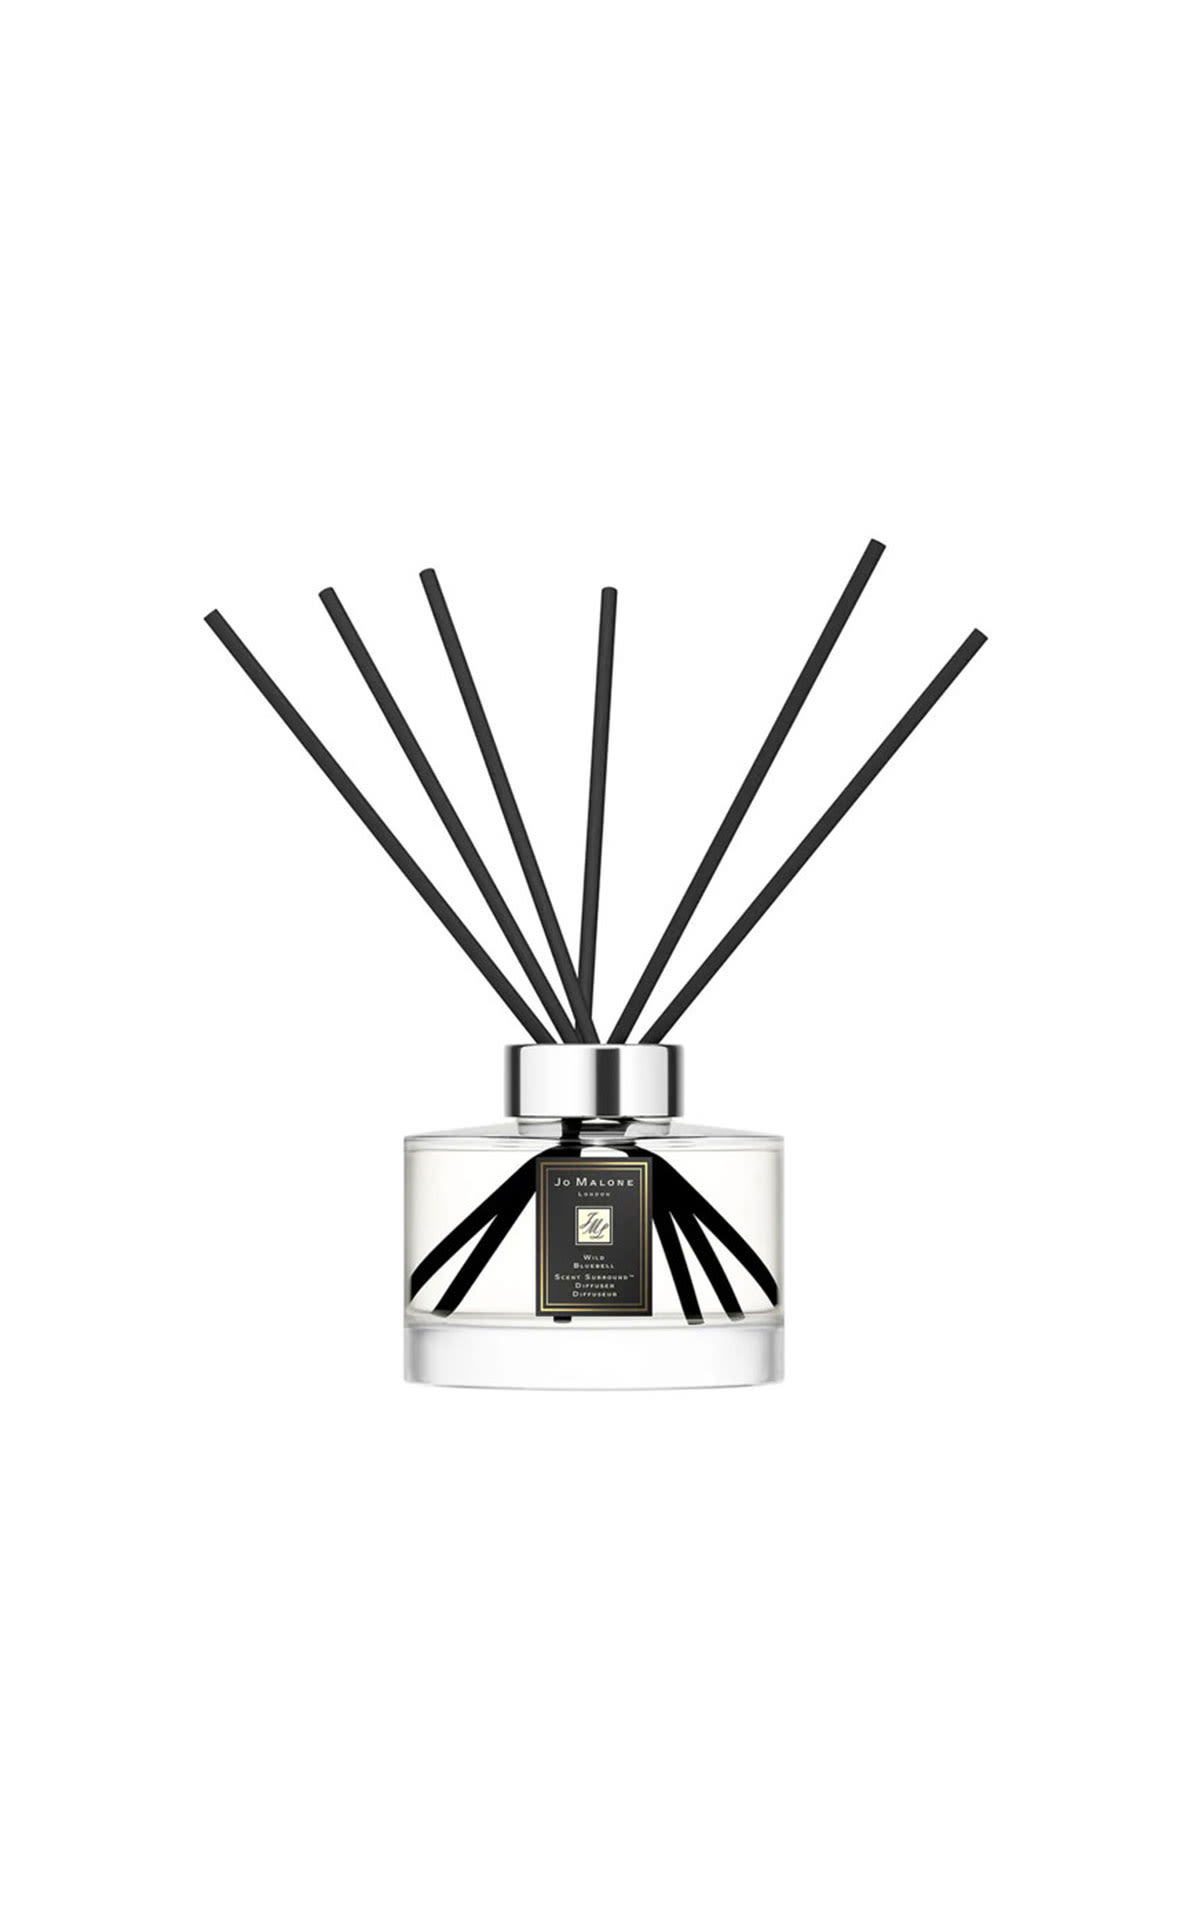 Jo Malone London Wild bluebell scent surround diffuser 65ml from Bicester Village